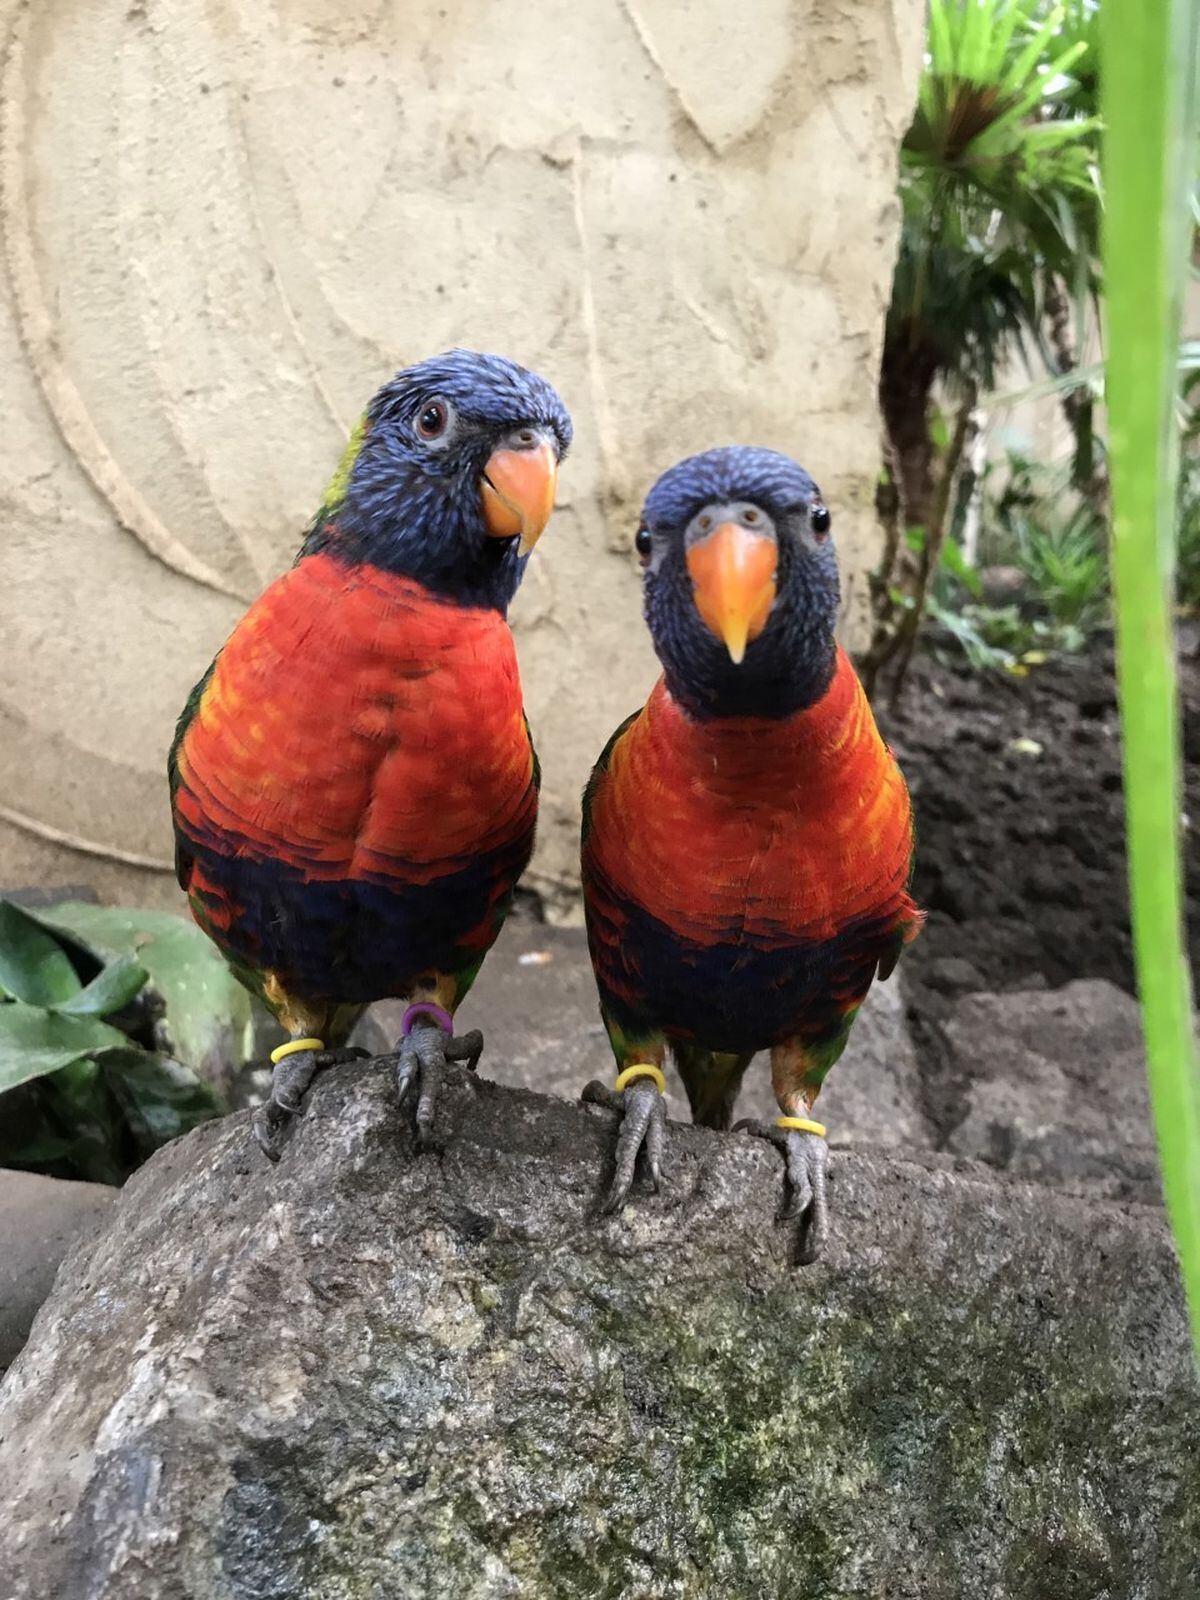 A monogamous pair of male lorikeets, sharing a rose. (Photo credit: Keeper Laura Hodgkins)